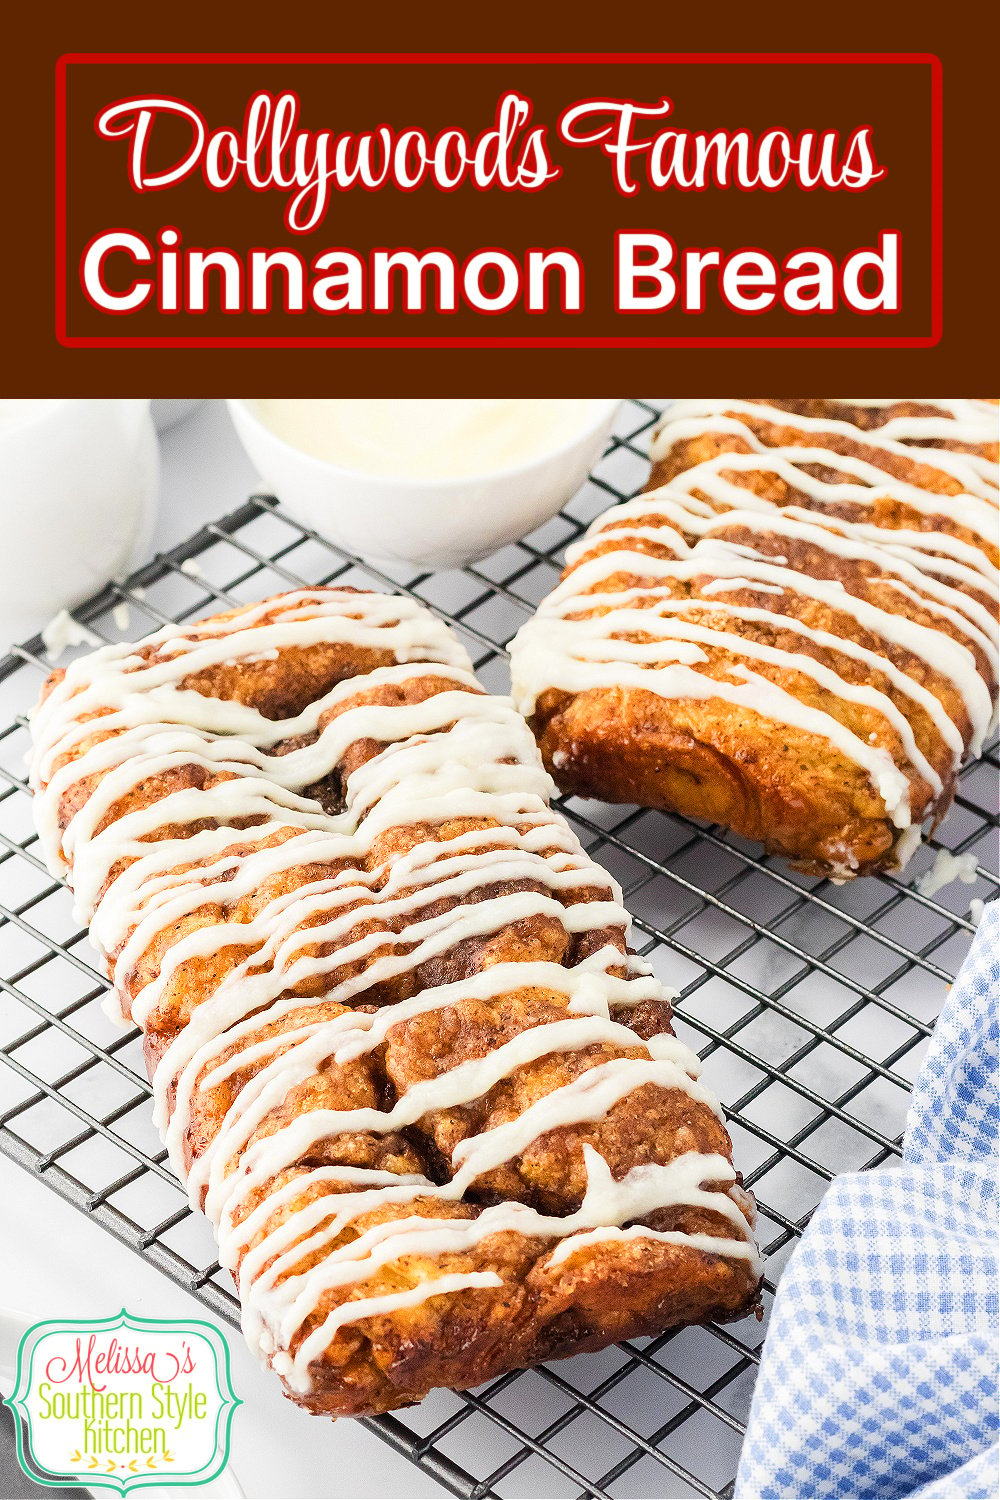 Make your own Dollywood's Famous Cinnamon Bread at home! #dollyparton #dollywoodcinnamonbread #dollypartonrecipes #cinnamonbreadrecipe #gristmill #dollywood #dollywoodfamouscinnamonbread via @melissasssk